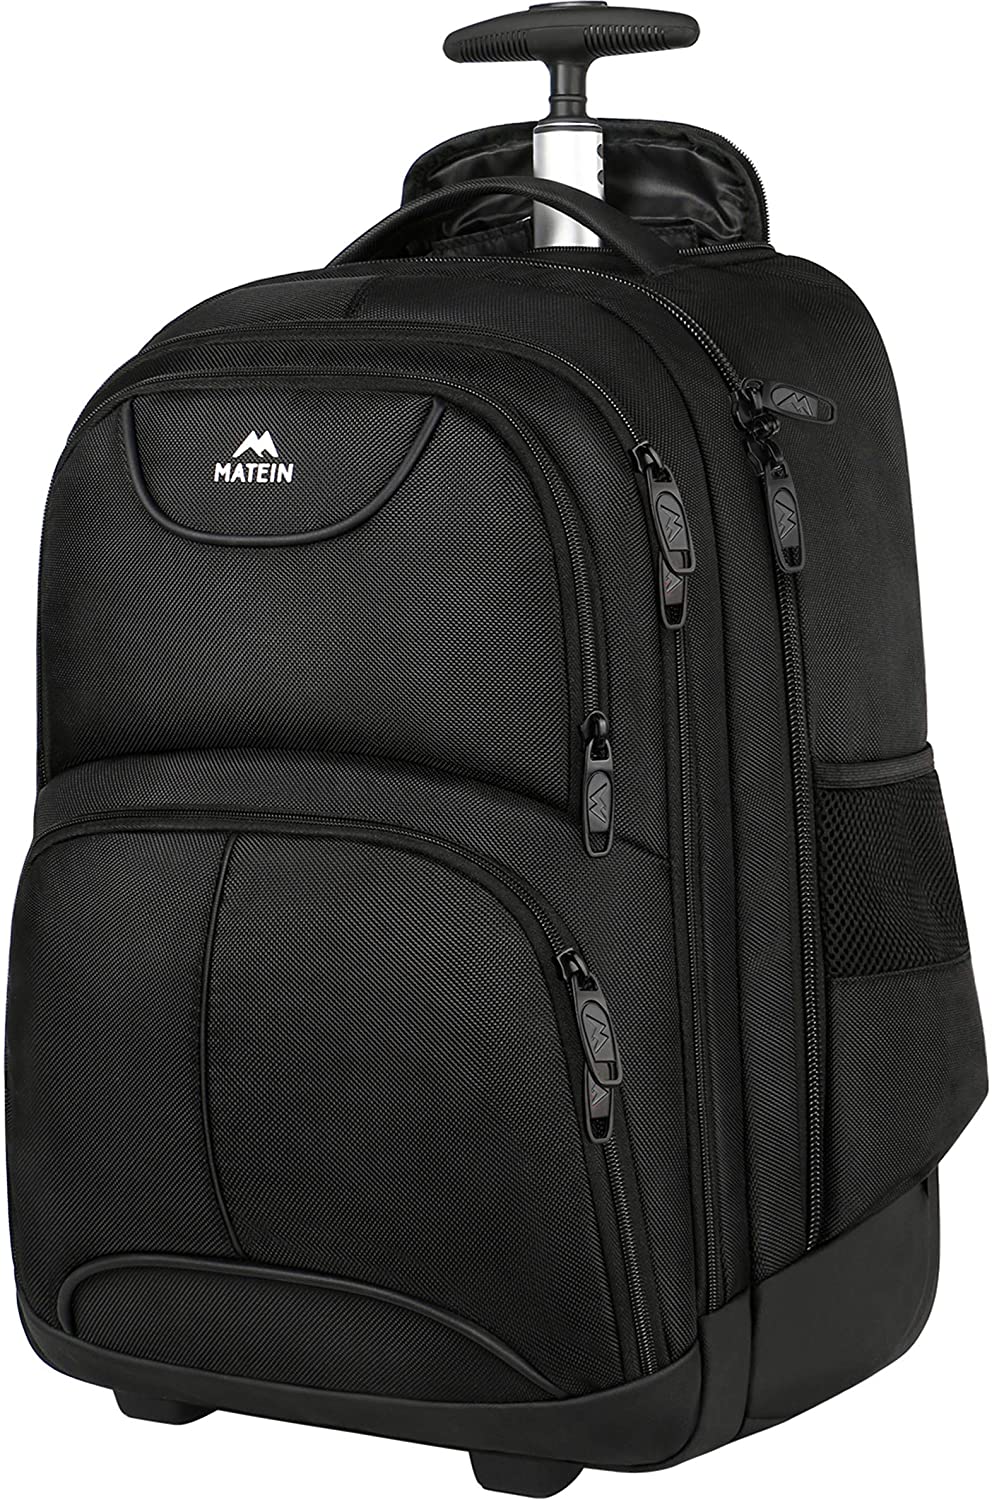 <strong>9. Matein Rolling Backpack</strong>